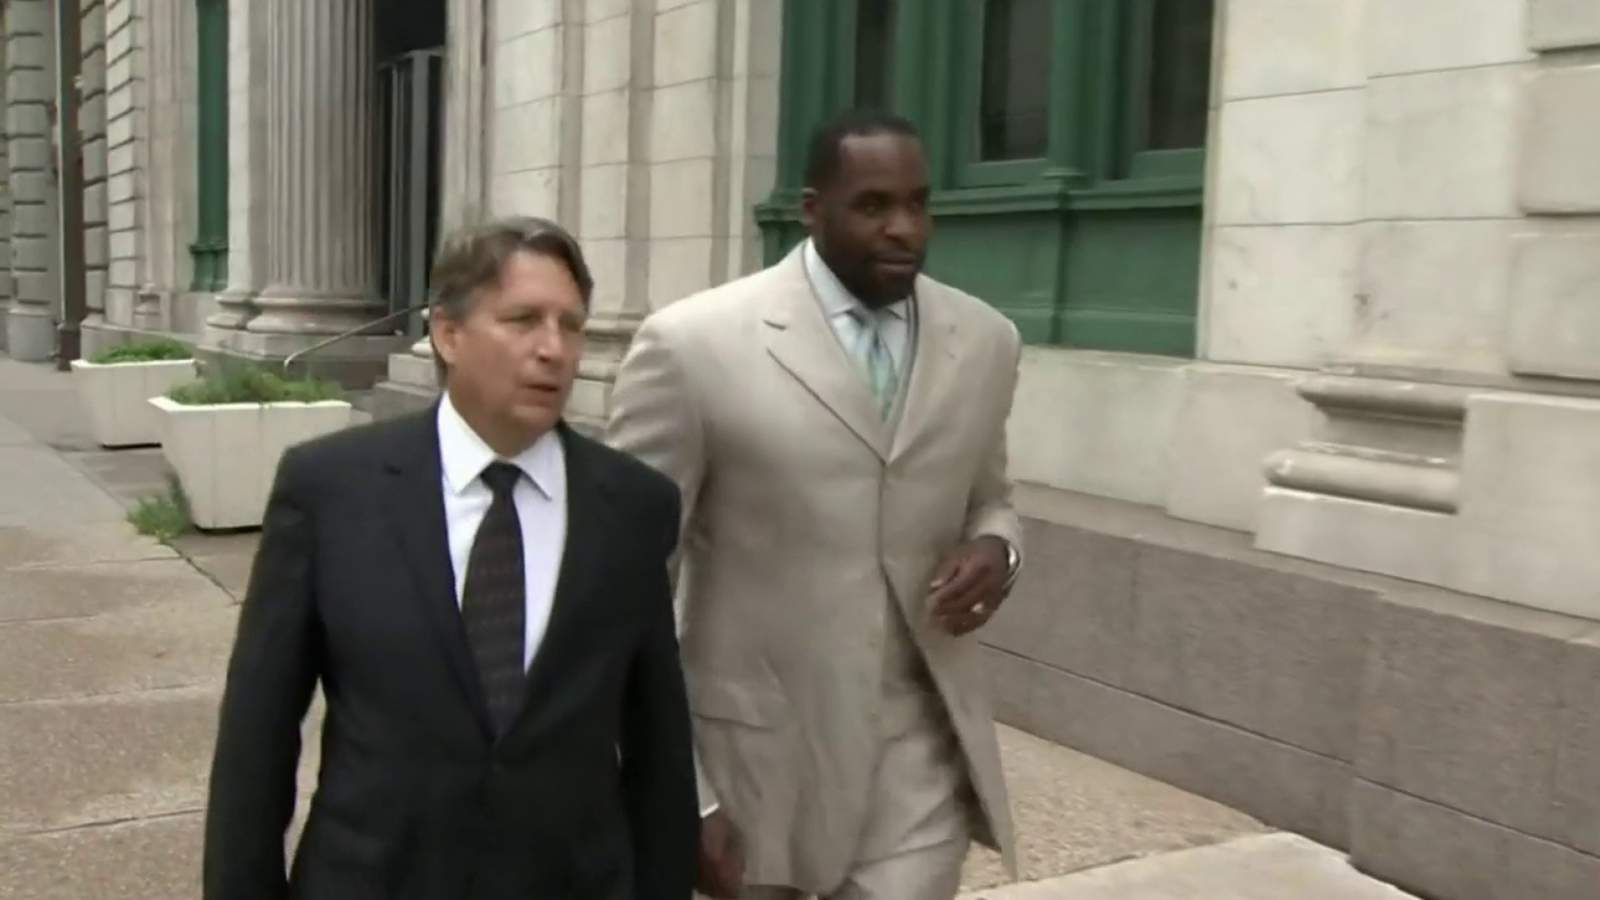 Michigan lawmaker traveling to White House to request clemency for Kwame Kilpatrick